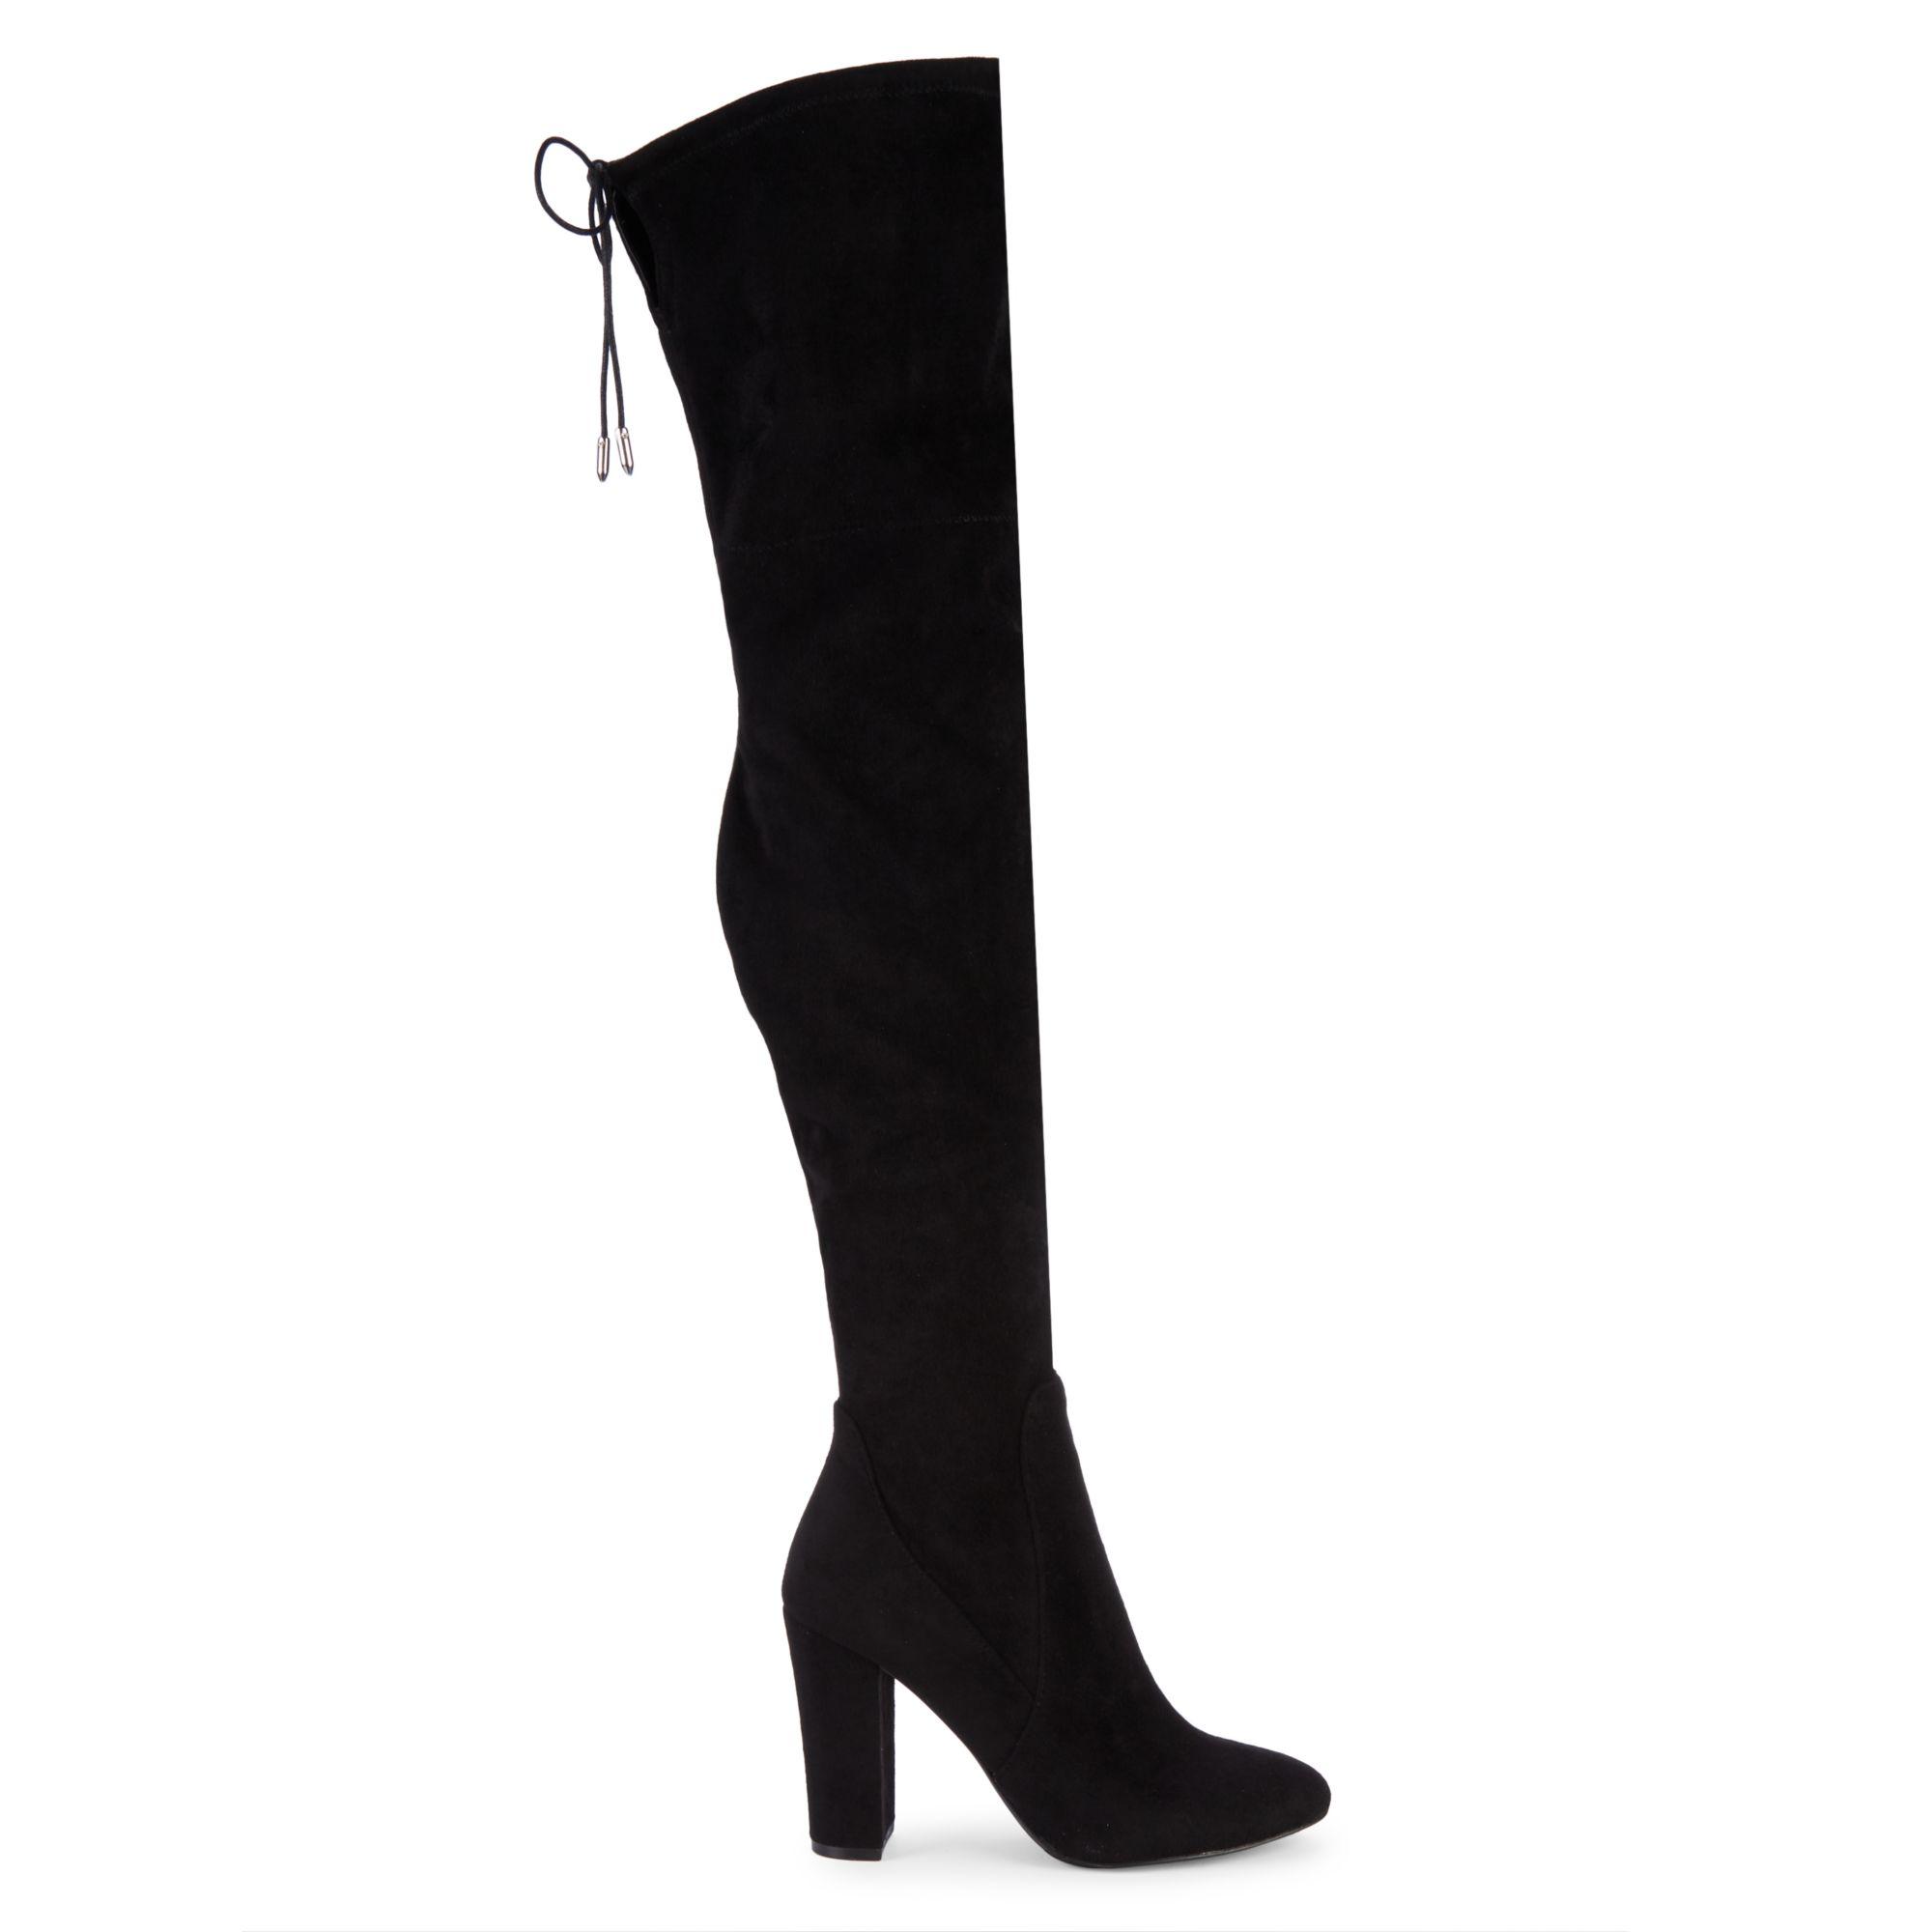 Dolce Vita Katy Suede Over-the-knee Boots in Black - Lyst